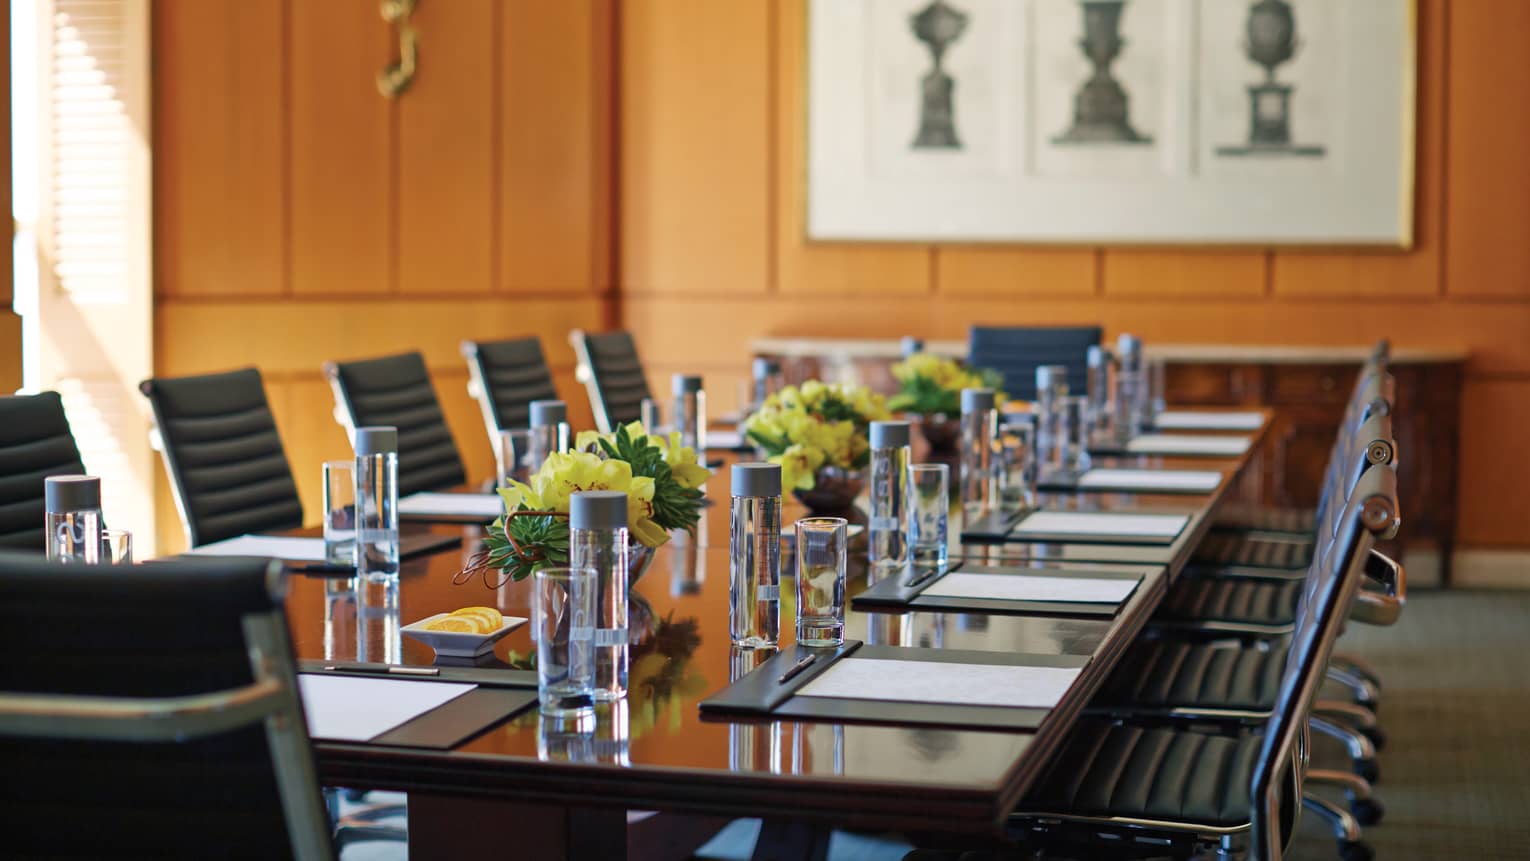 Large boardroom meeting table with yellow flowers, glassware under wood panel walls, art